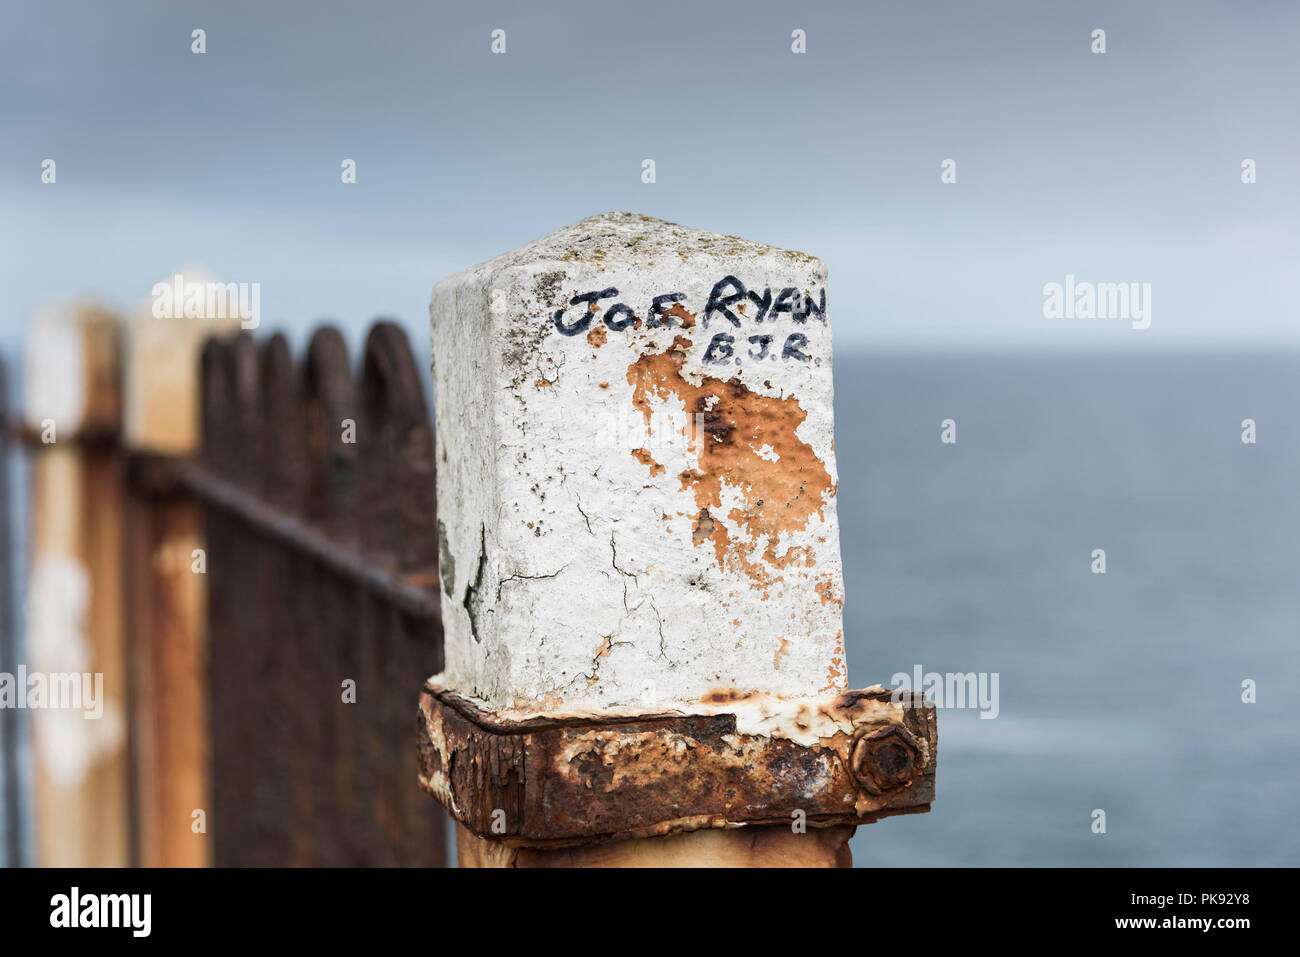 A name written on a weathered concrete fence post. Stock Photo